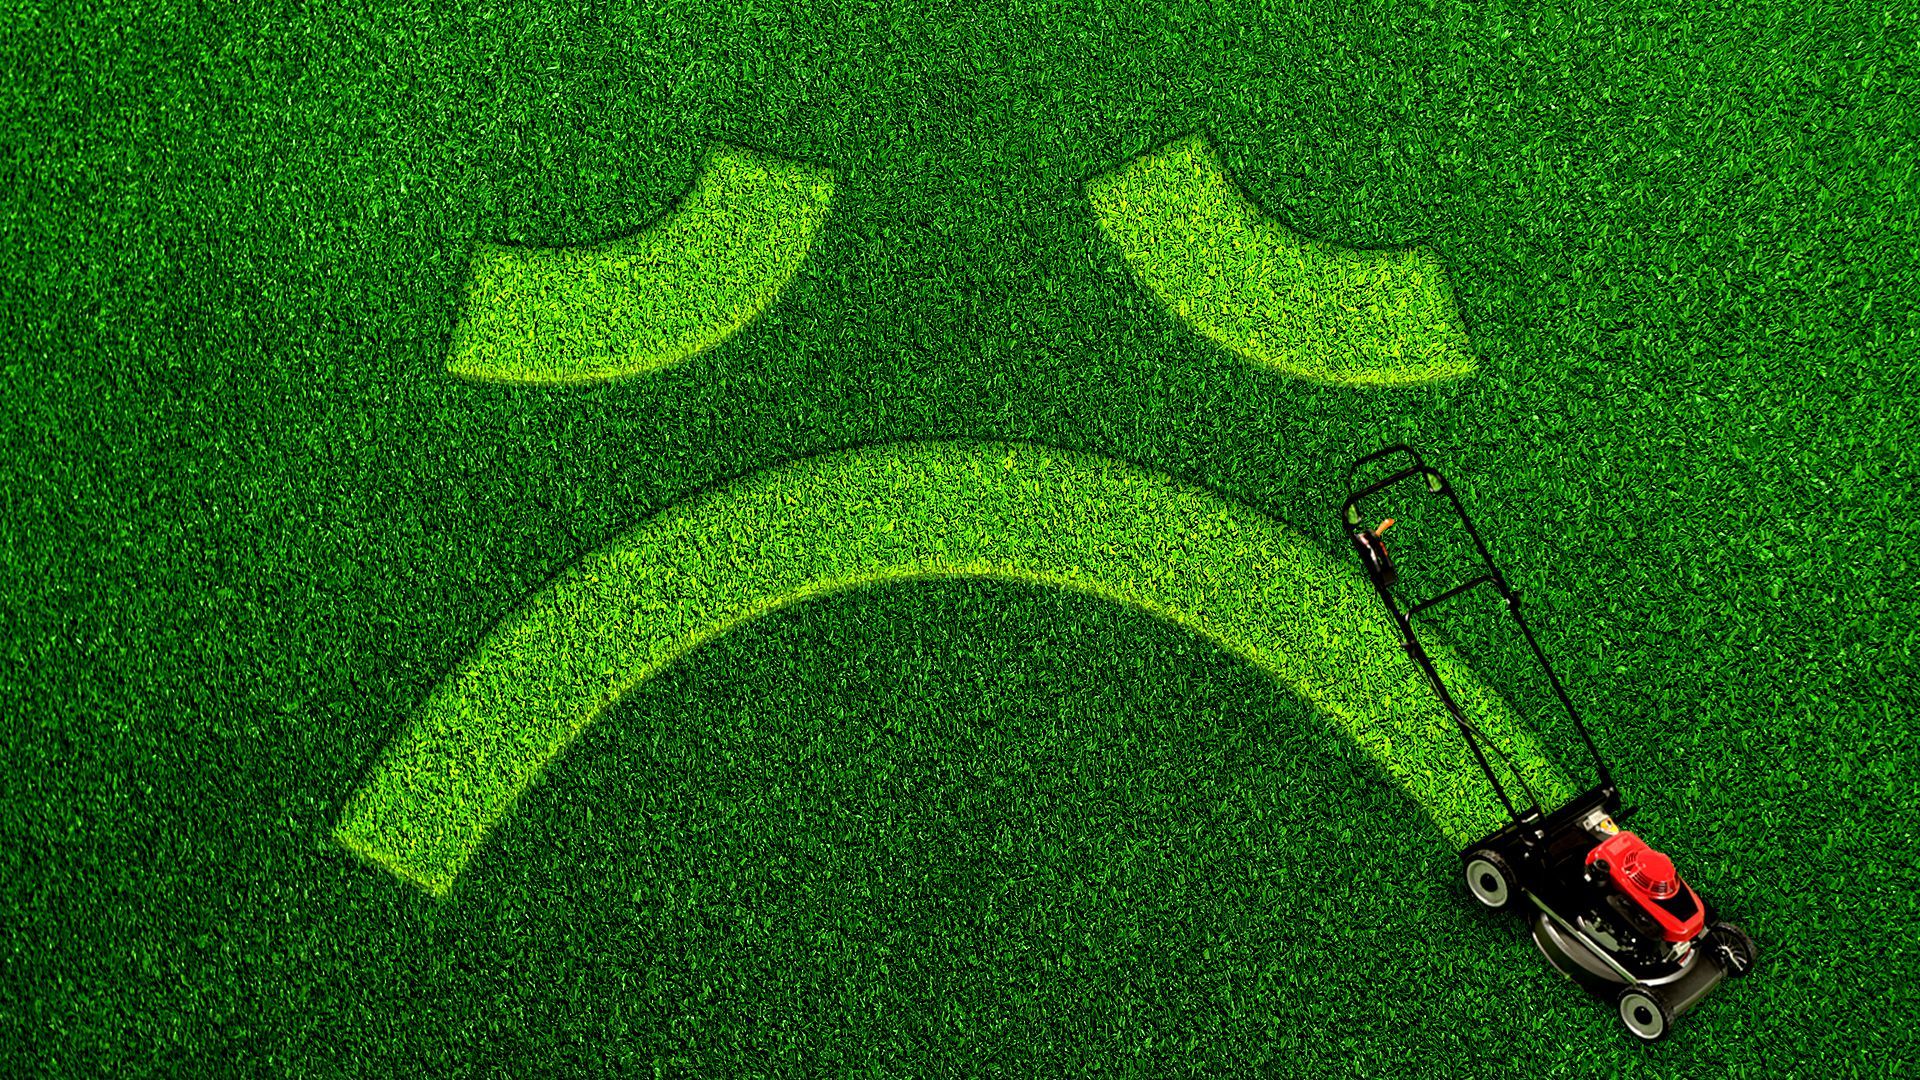 Illustration of a lawn mower next to cut grass forming the shape of a sad face